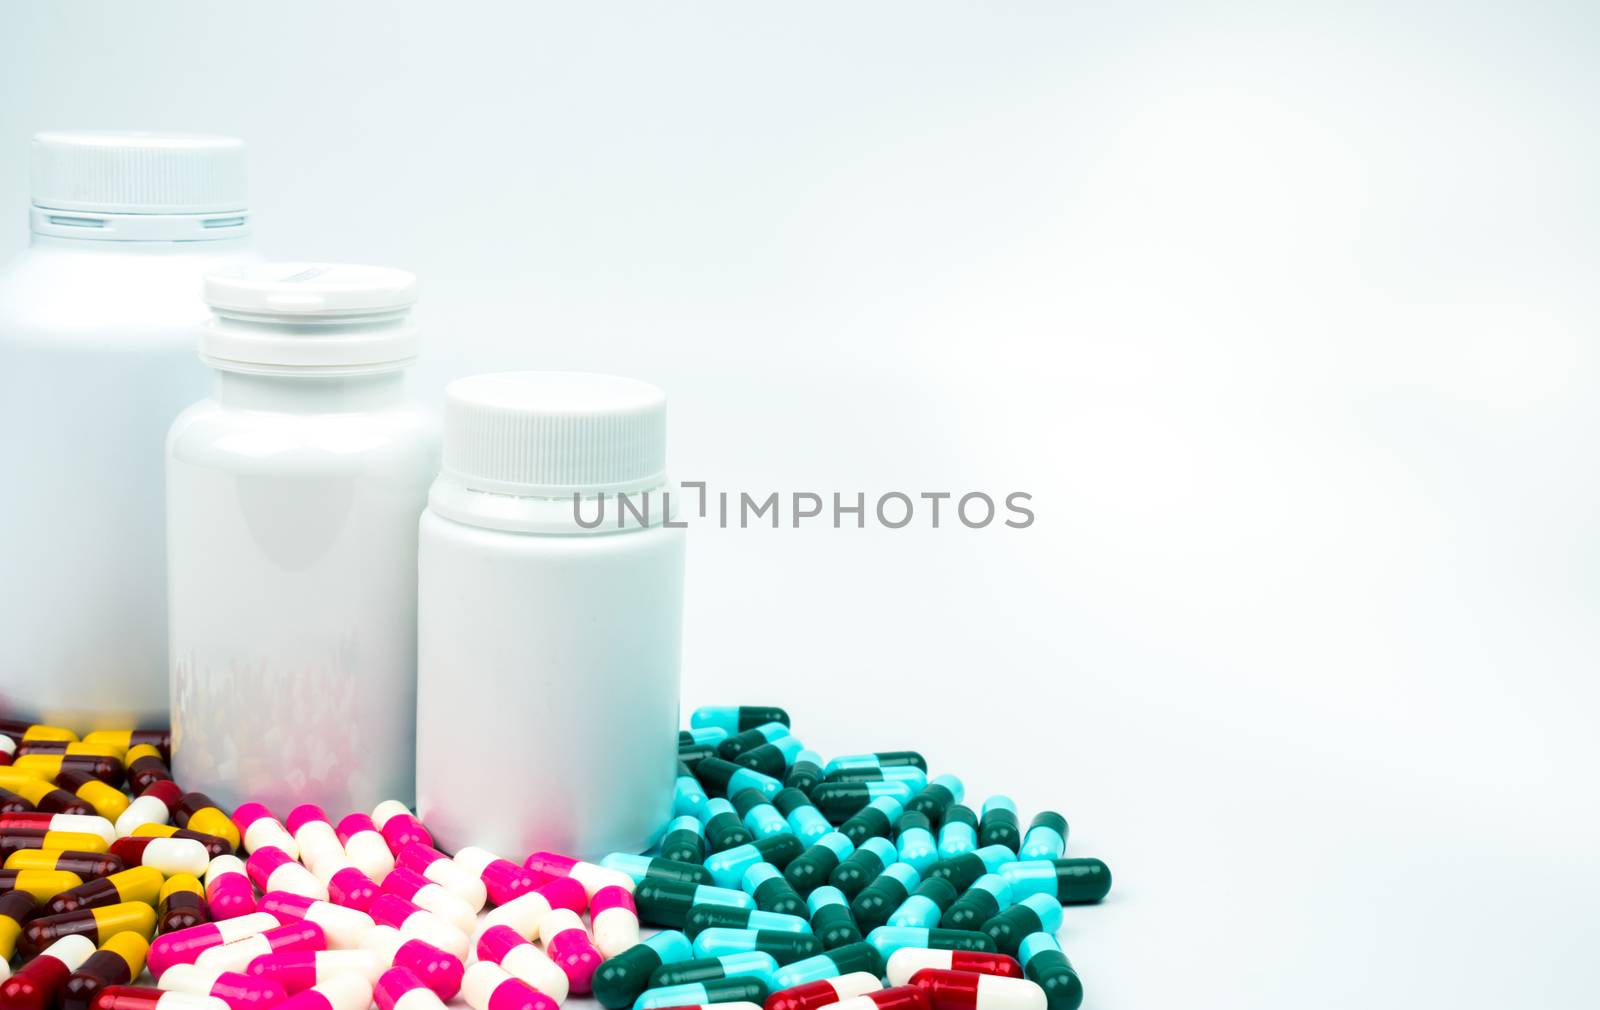 Antibiotic capsules pills and plastic bottle with blank label isolated on white background with copy space. Drug resistance concept. Antibiotics drug use with reasonable and global healthcare concept. Pharmaceutical industry. Health budgets and policy.